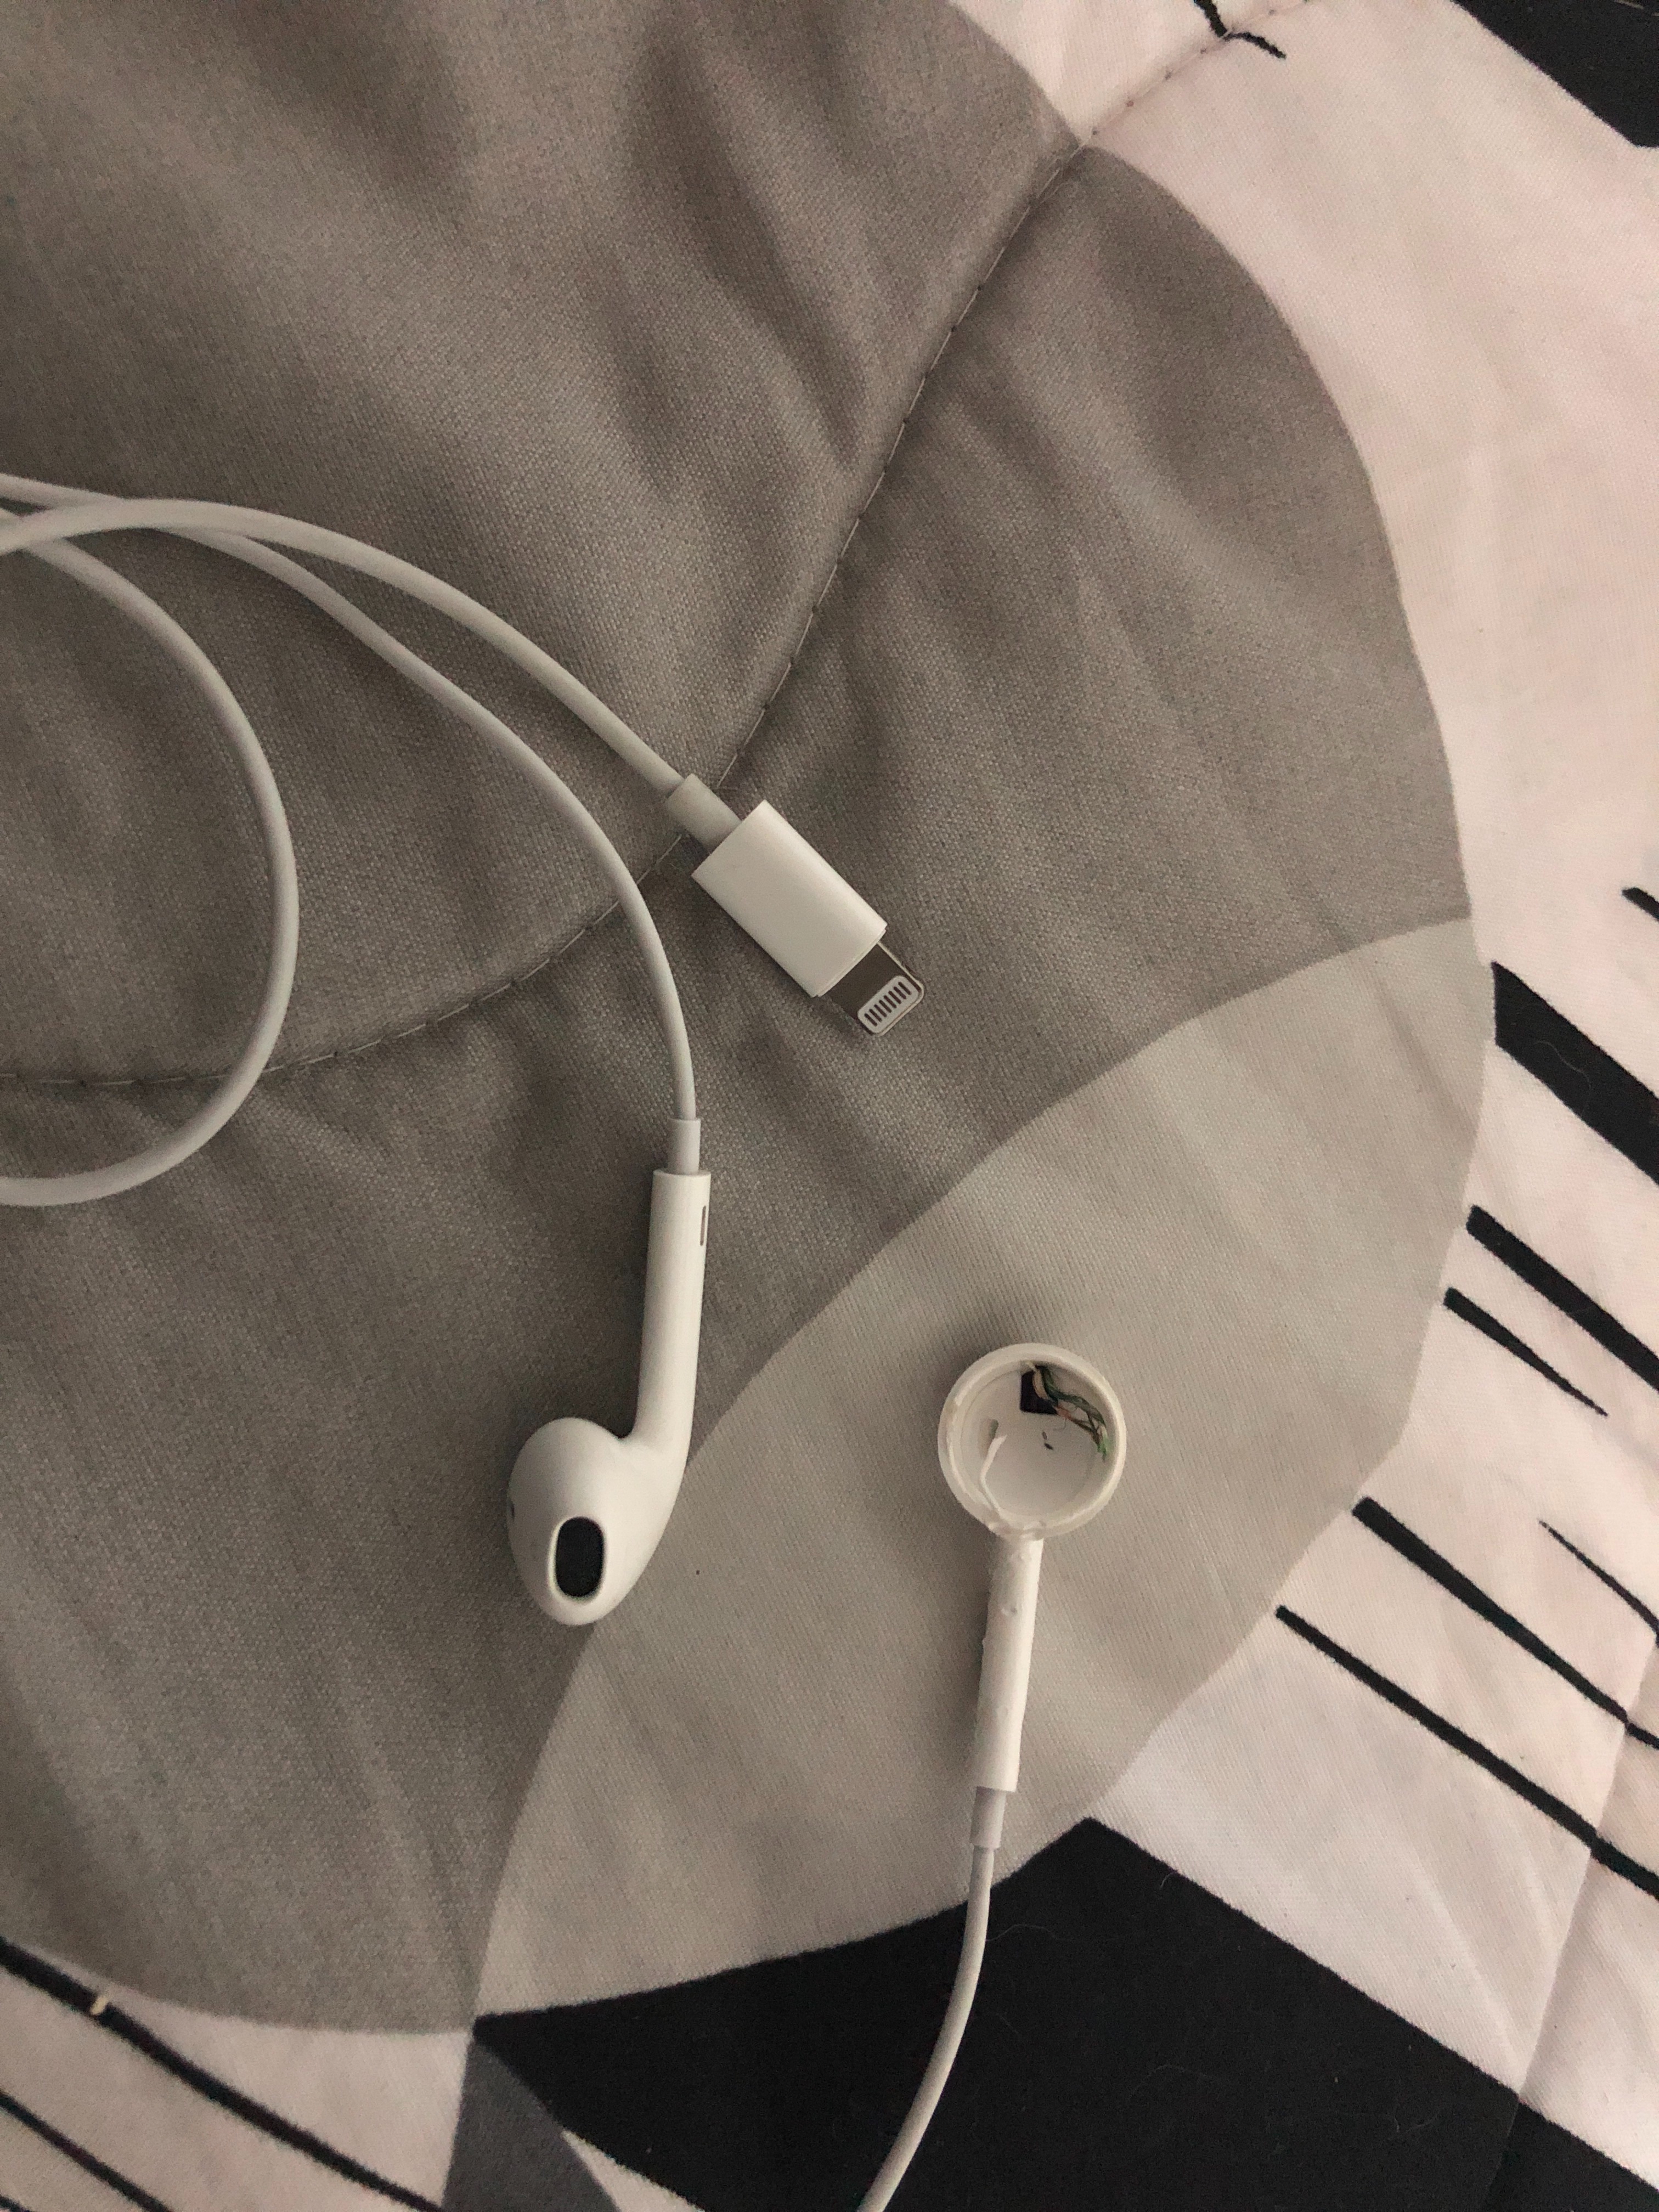 My dog ate one of the EarPods, if I go to… - Apple Community